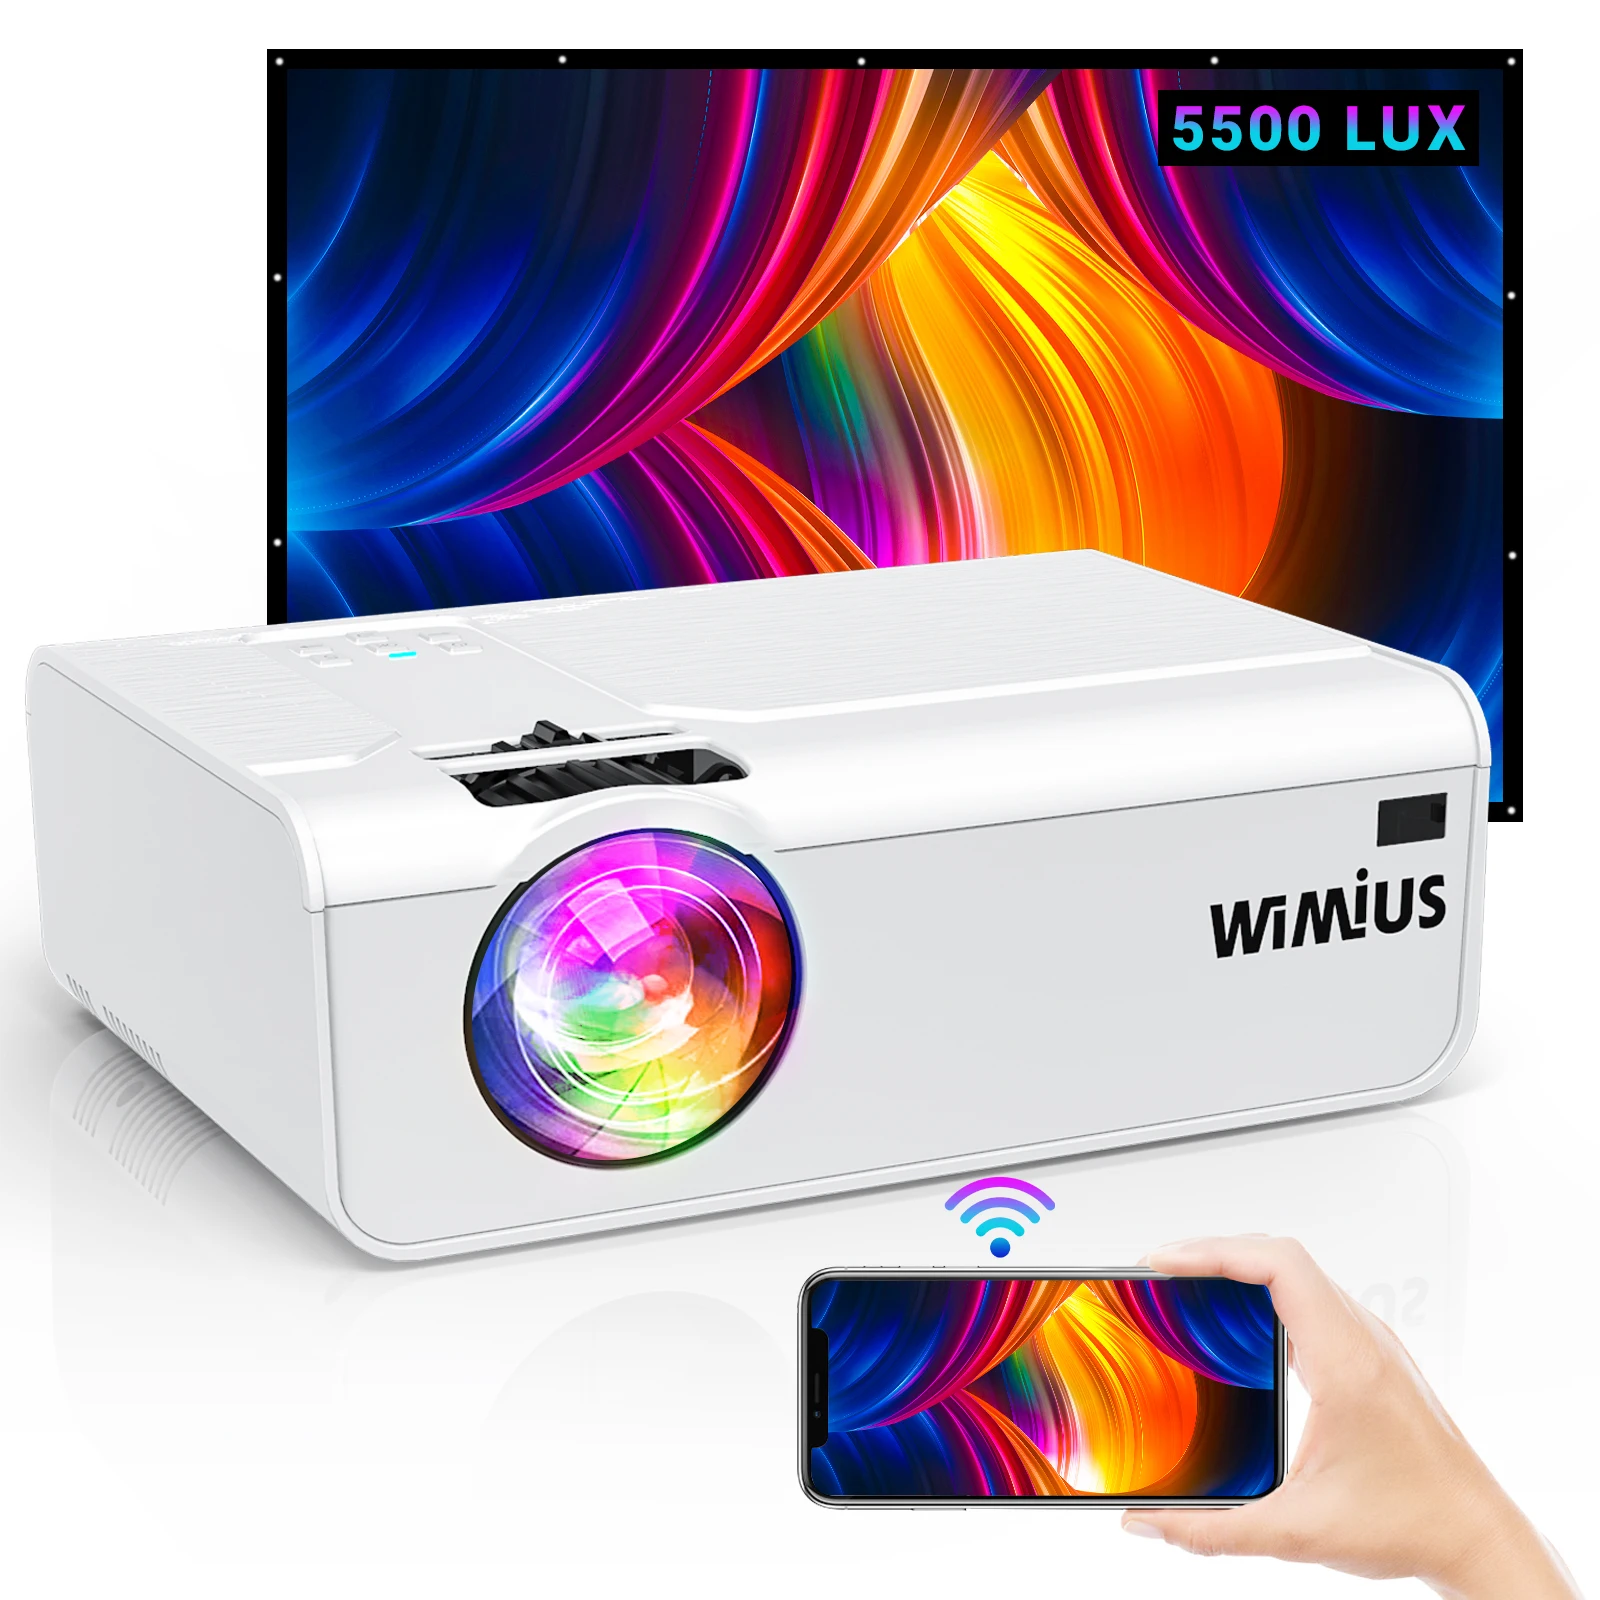 

2023 Mini Projector WiFi Projectors K2 Native 1080P/4K Support 300'' Screen LUNENS 5500 projector for Home Projector phone